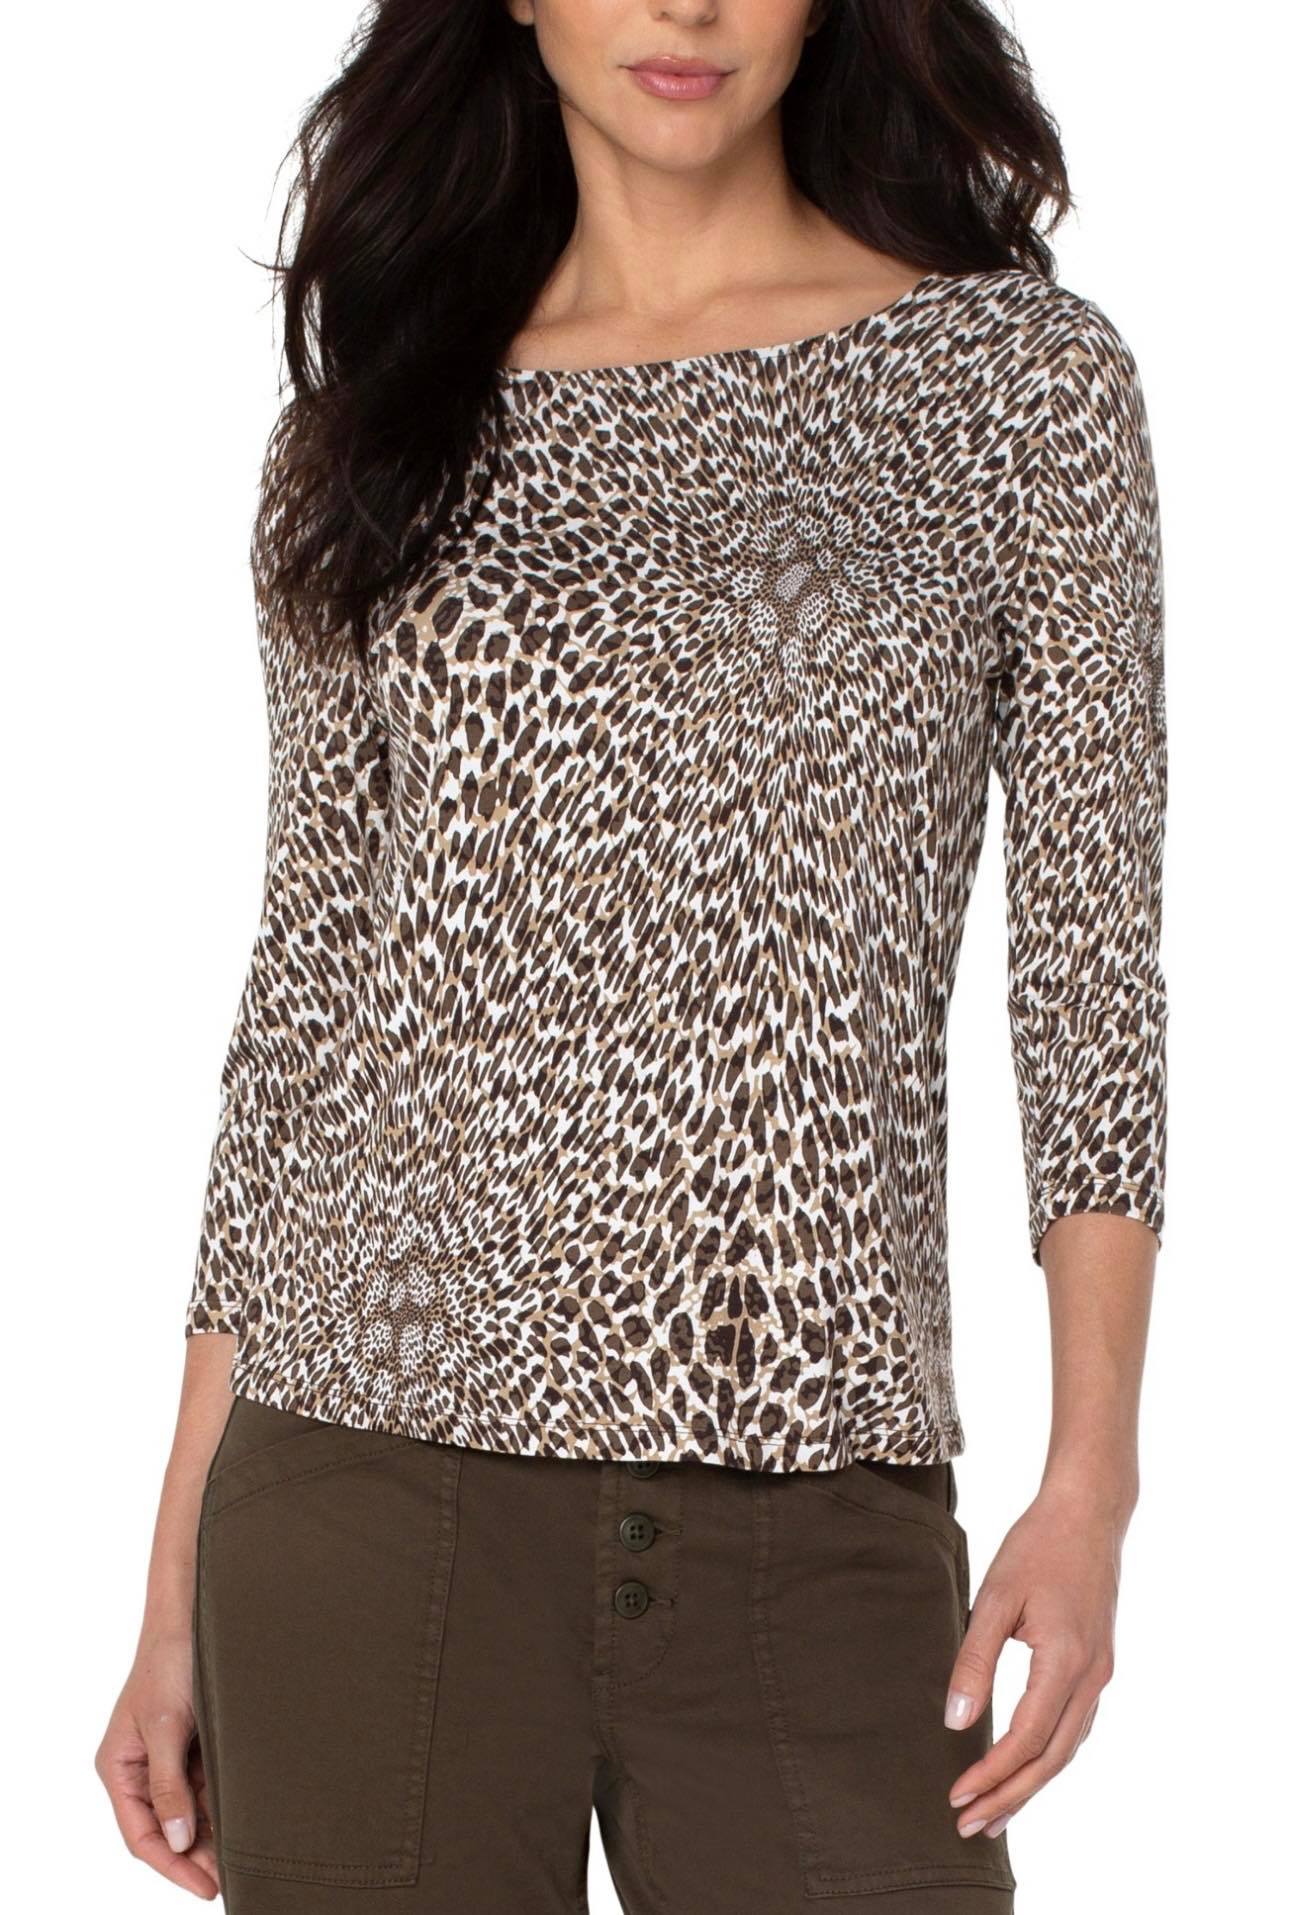 Liverpool Animal Print Scoop Back Top- Clearance Final Sale